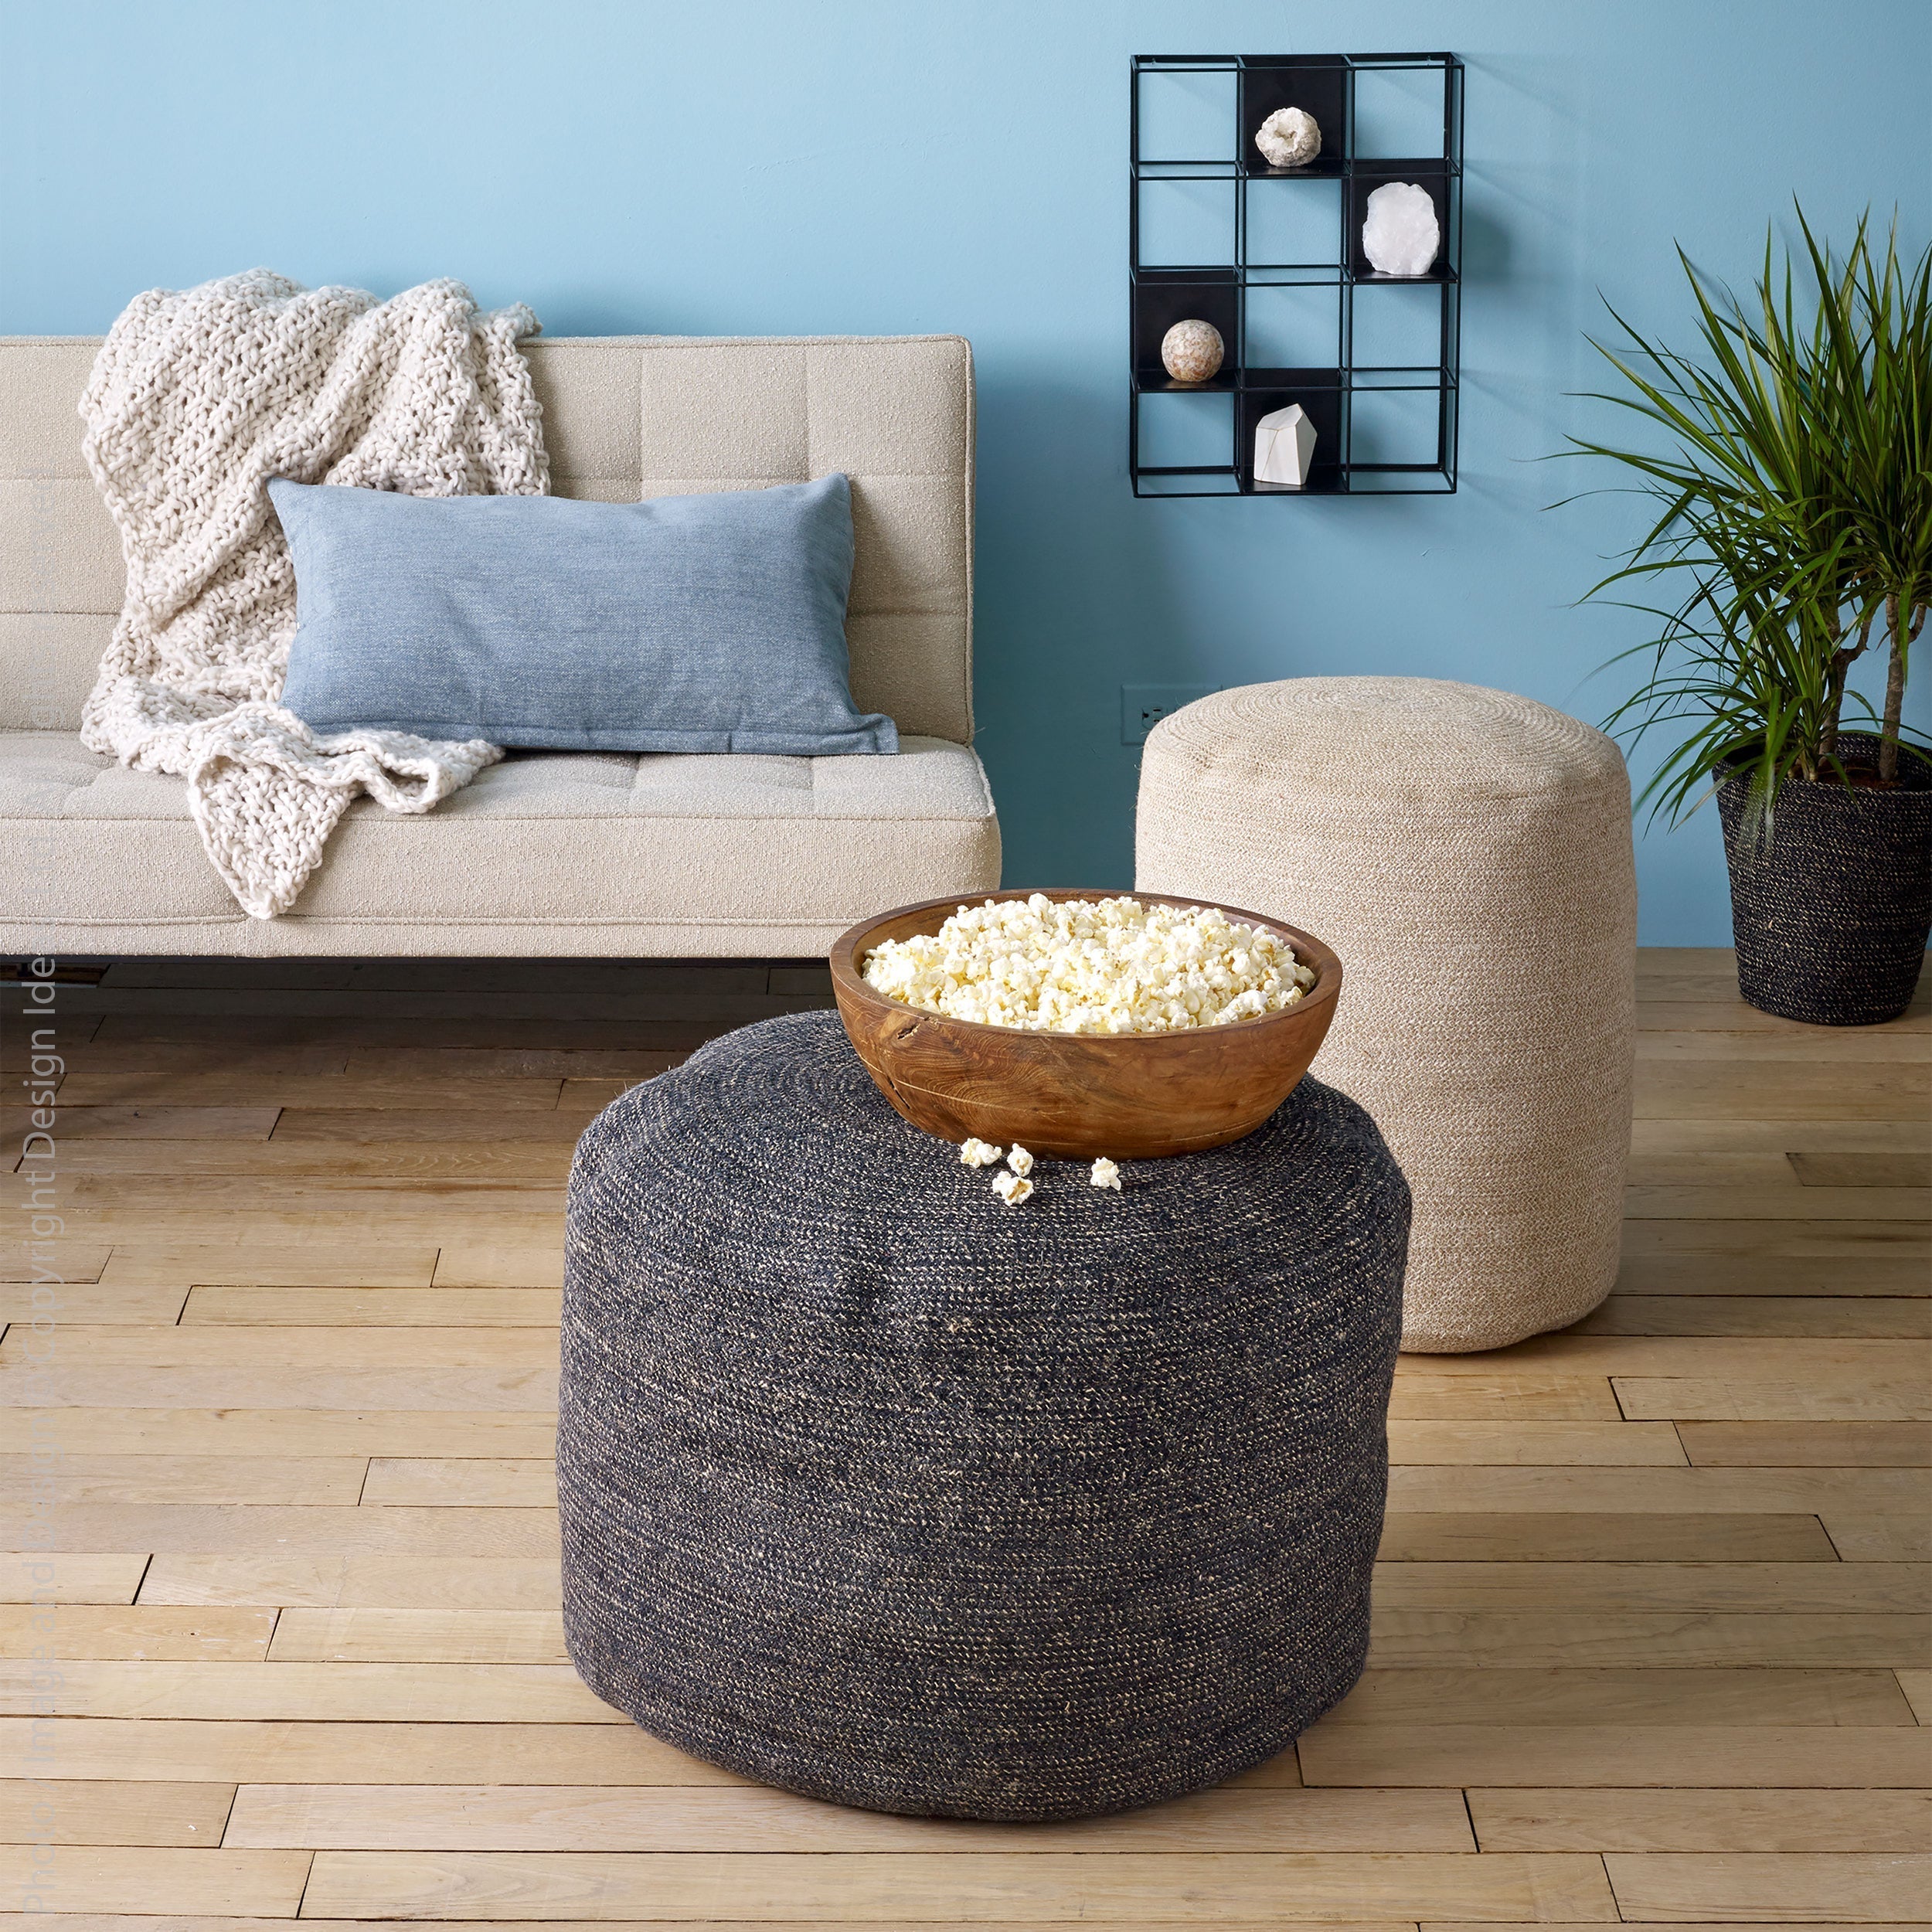 Melia™ pouf (narrow) - Black | Image 2 | Premium Ottoman from the Melia collection | made with Jute for long lasting use | texxture